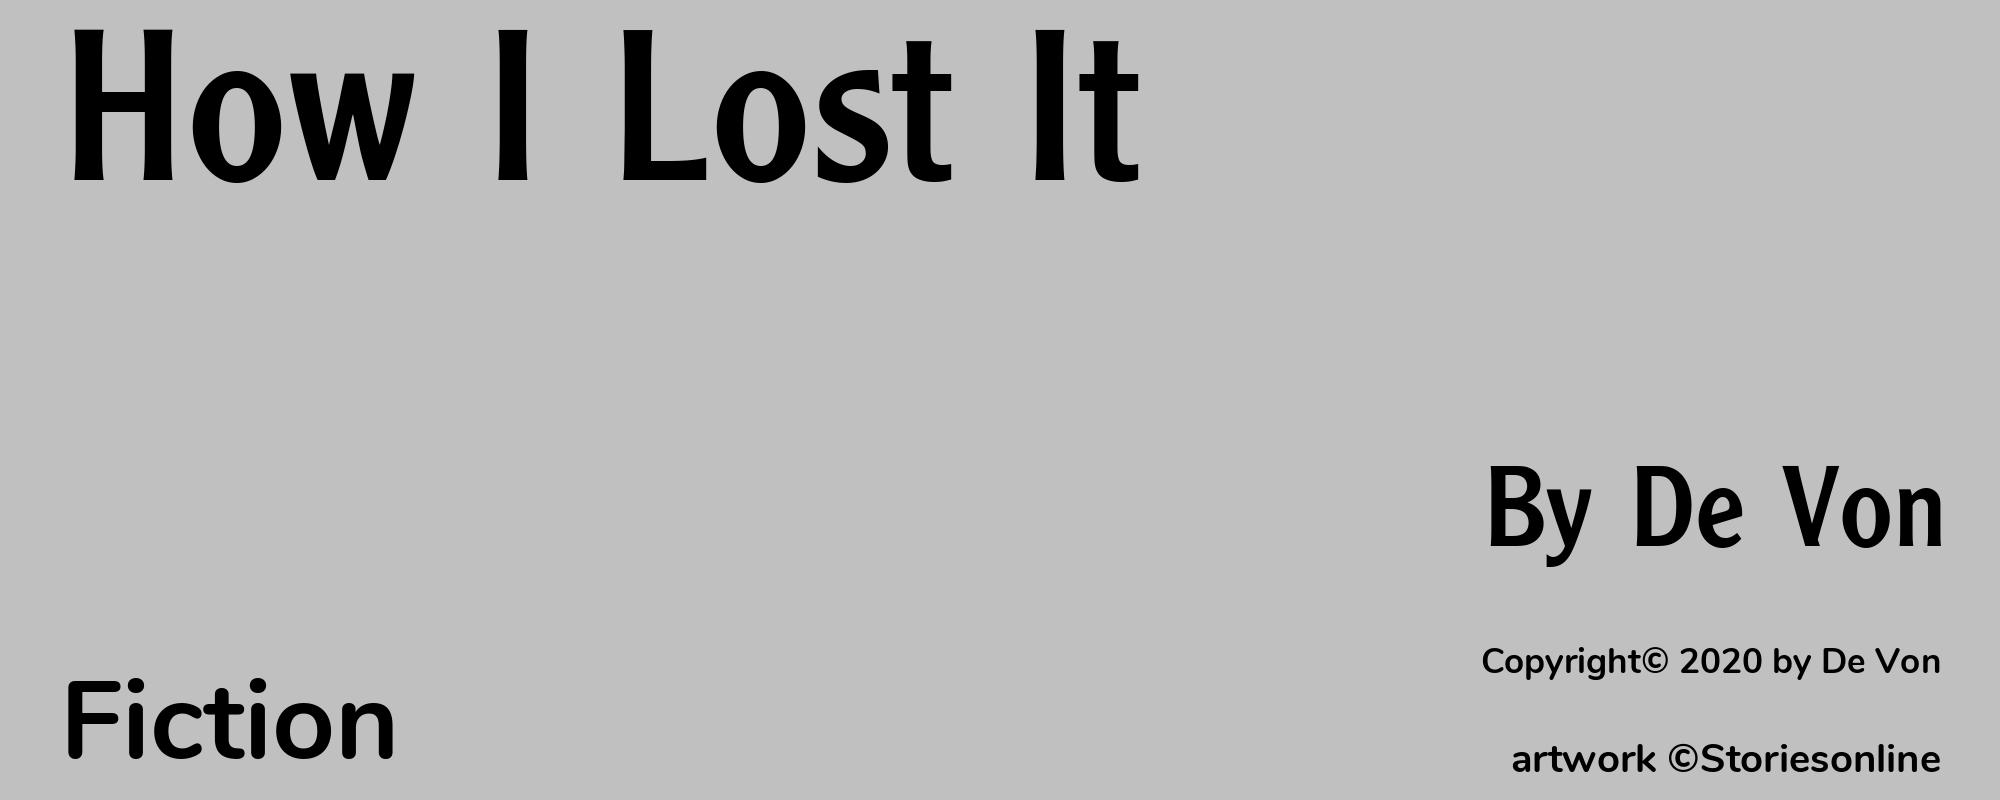 How I Lost It - Cover